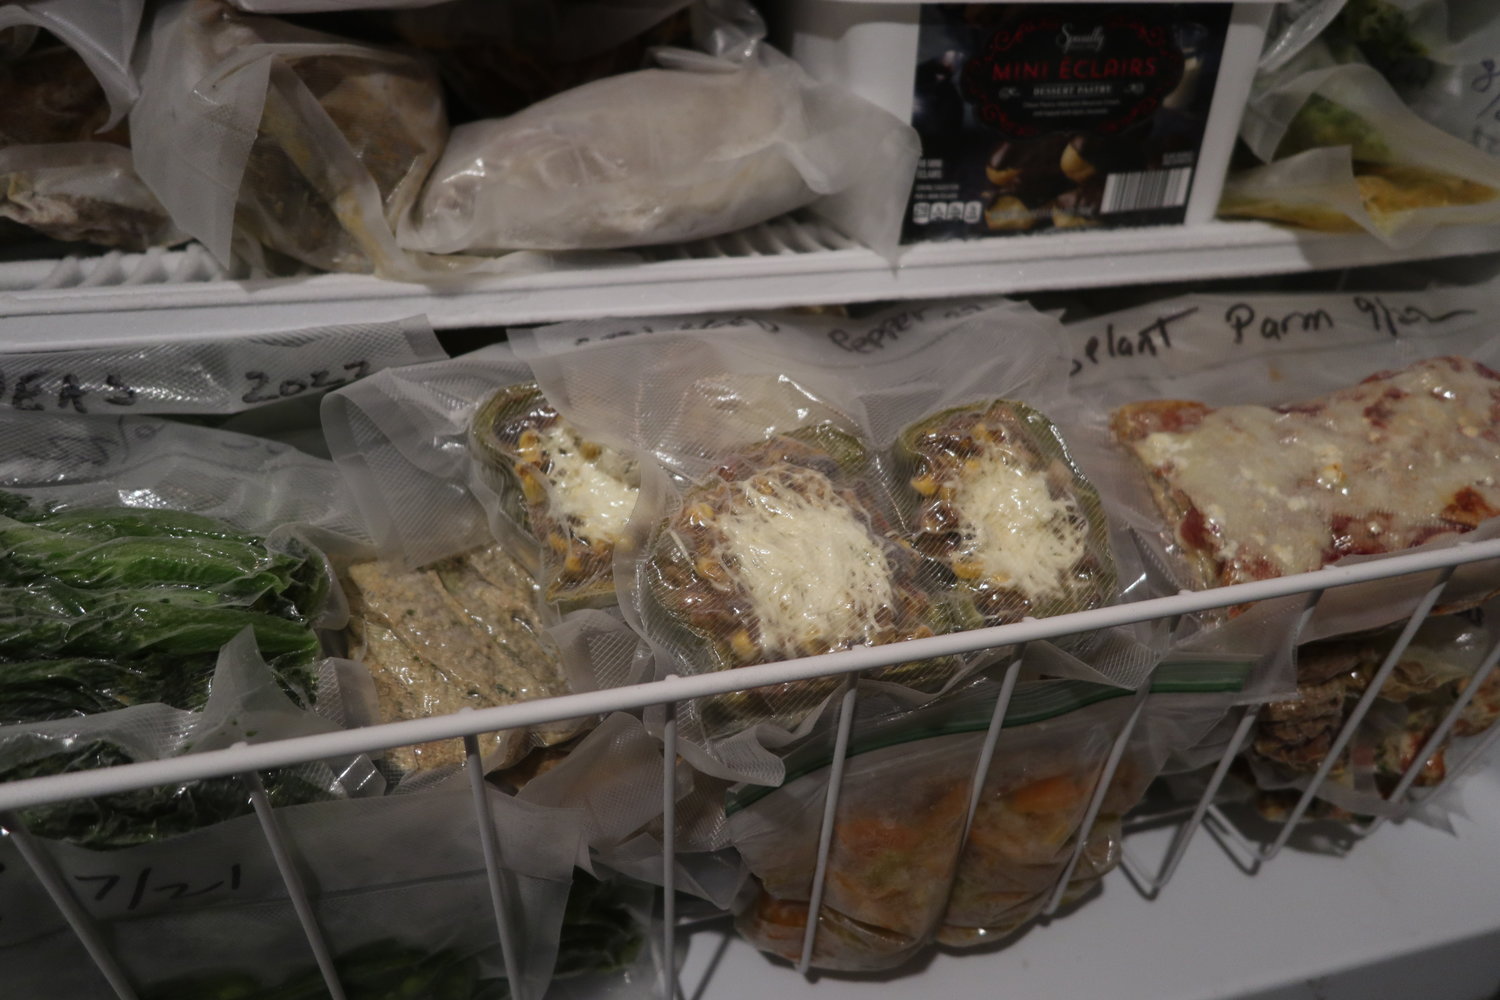 I tell people the garden is like having a boat, in that it takes a lot of time. On the other hand, my freezer serves as the frozen food aisle in a grocery store, conveniently located in my basement.